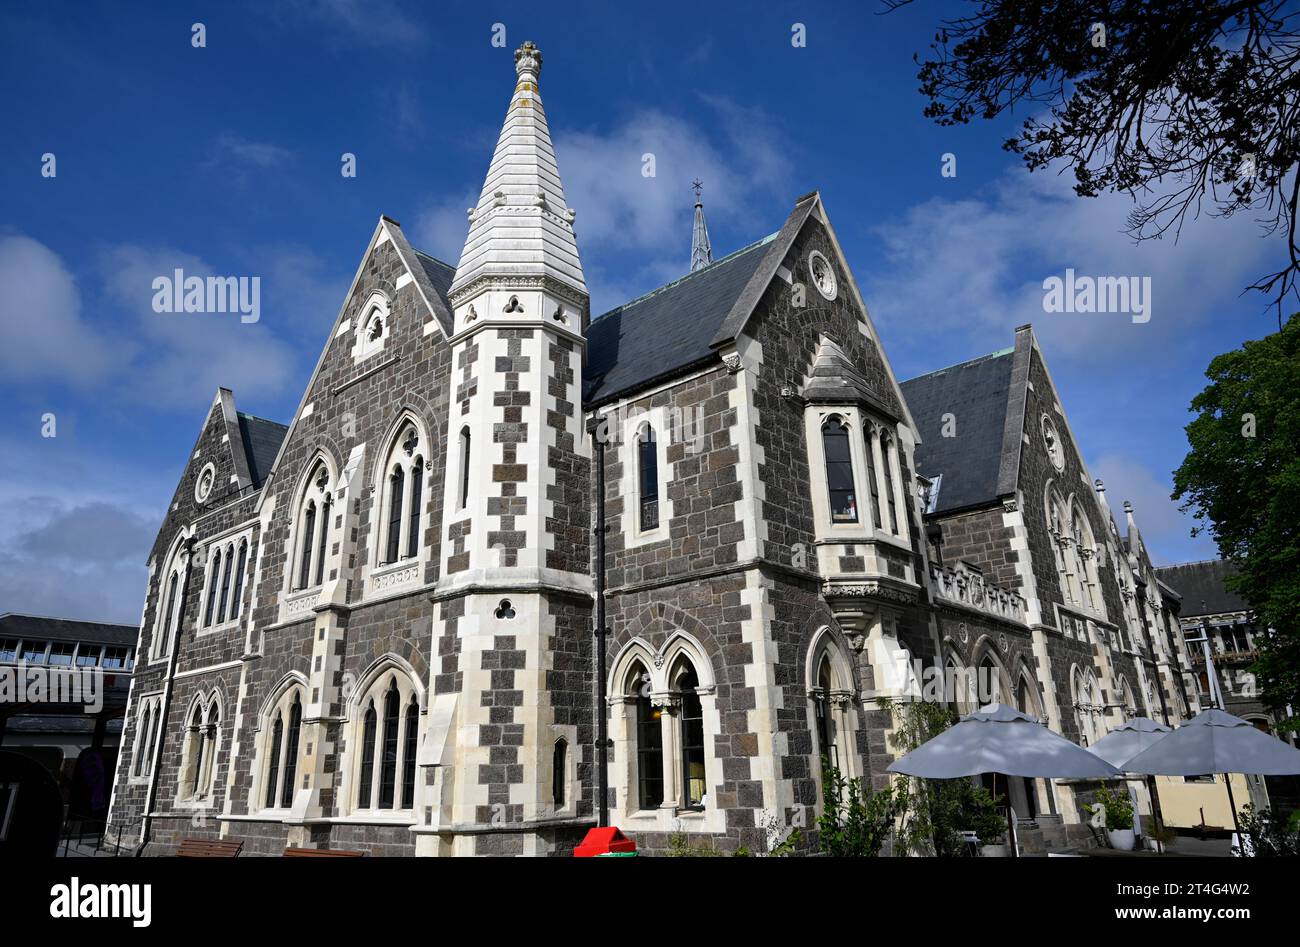 The Old Christchurch Boys High School Building in The Christchurch Arts Centre, Canterbury, New Zealand. Stock Photo